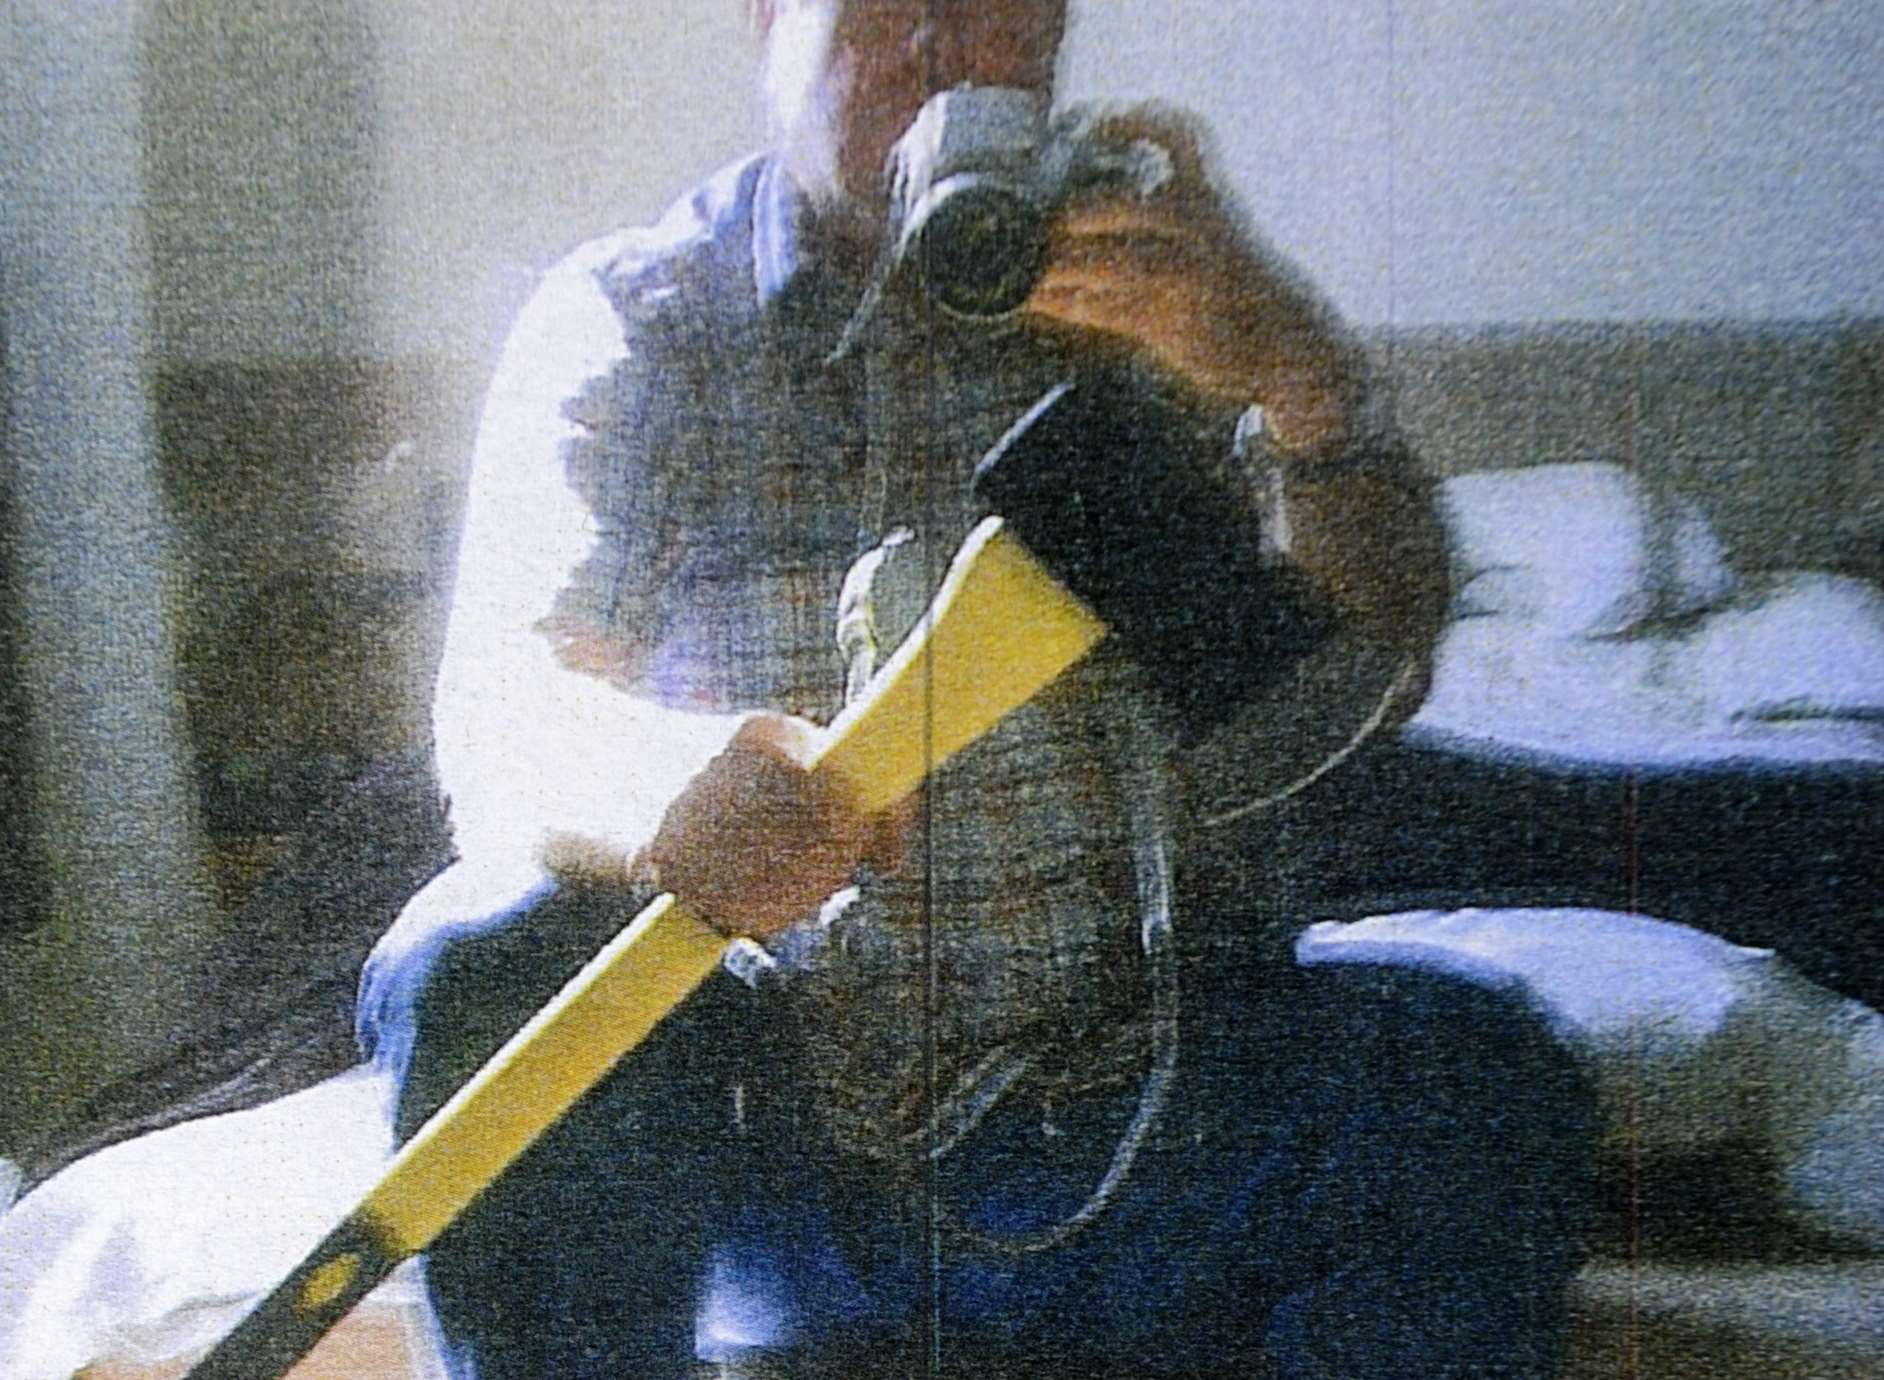 Bolinger poses with an axe - a picture which was shown to the jury during his 2014 trial